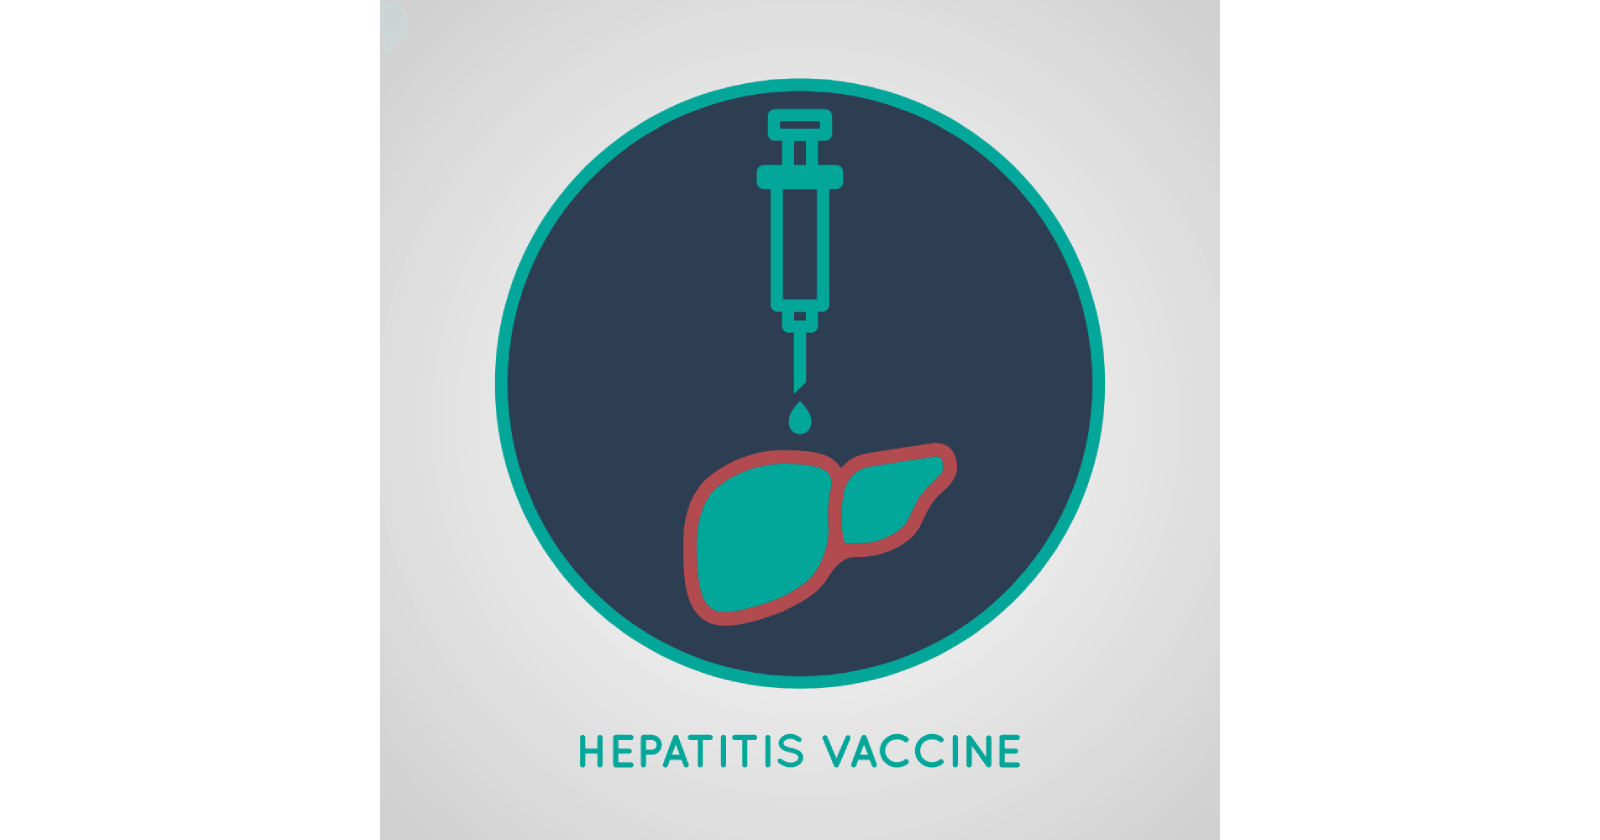 All about the Hepatitis B Vaccine: Purpose, Dosage & Side Effects